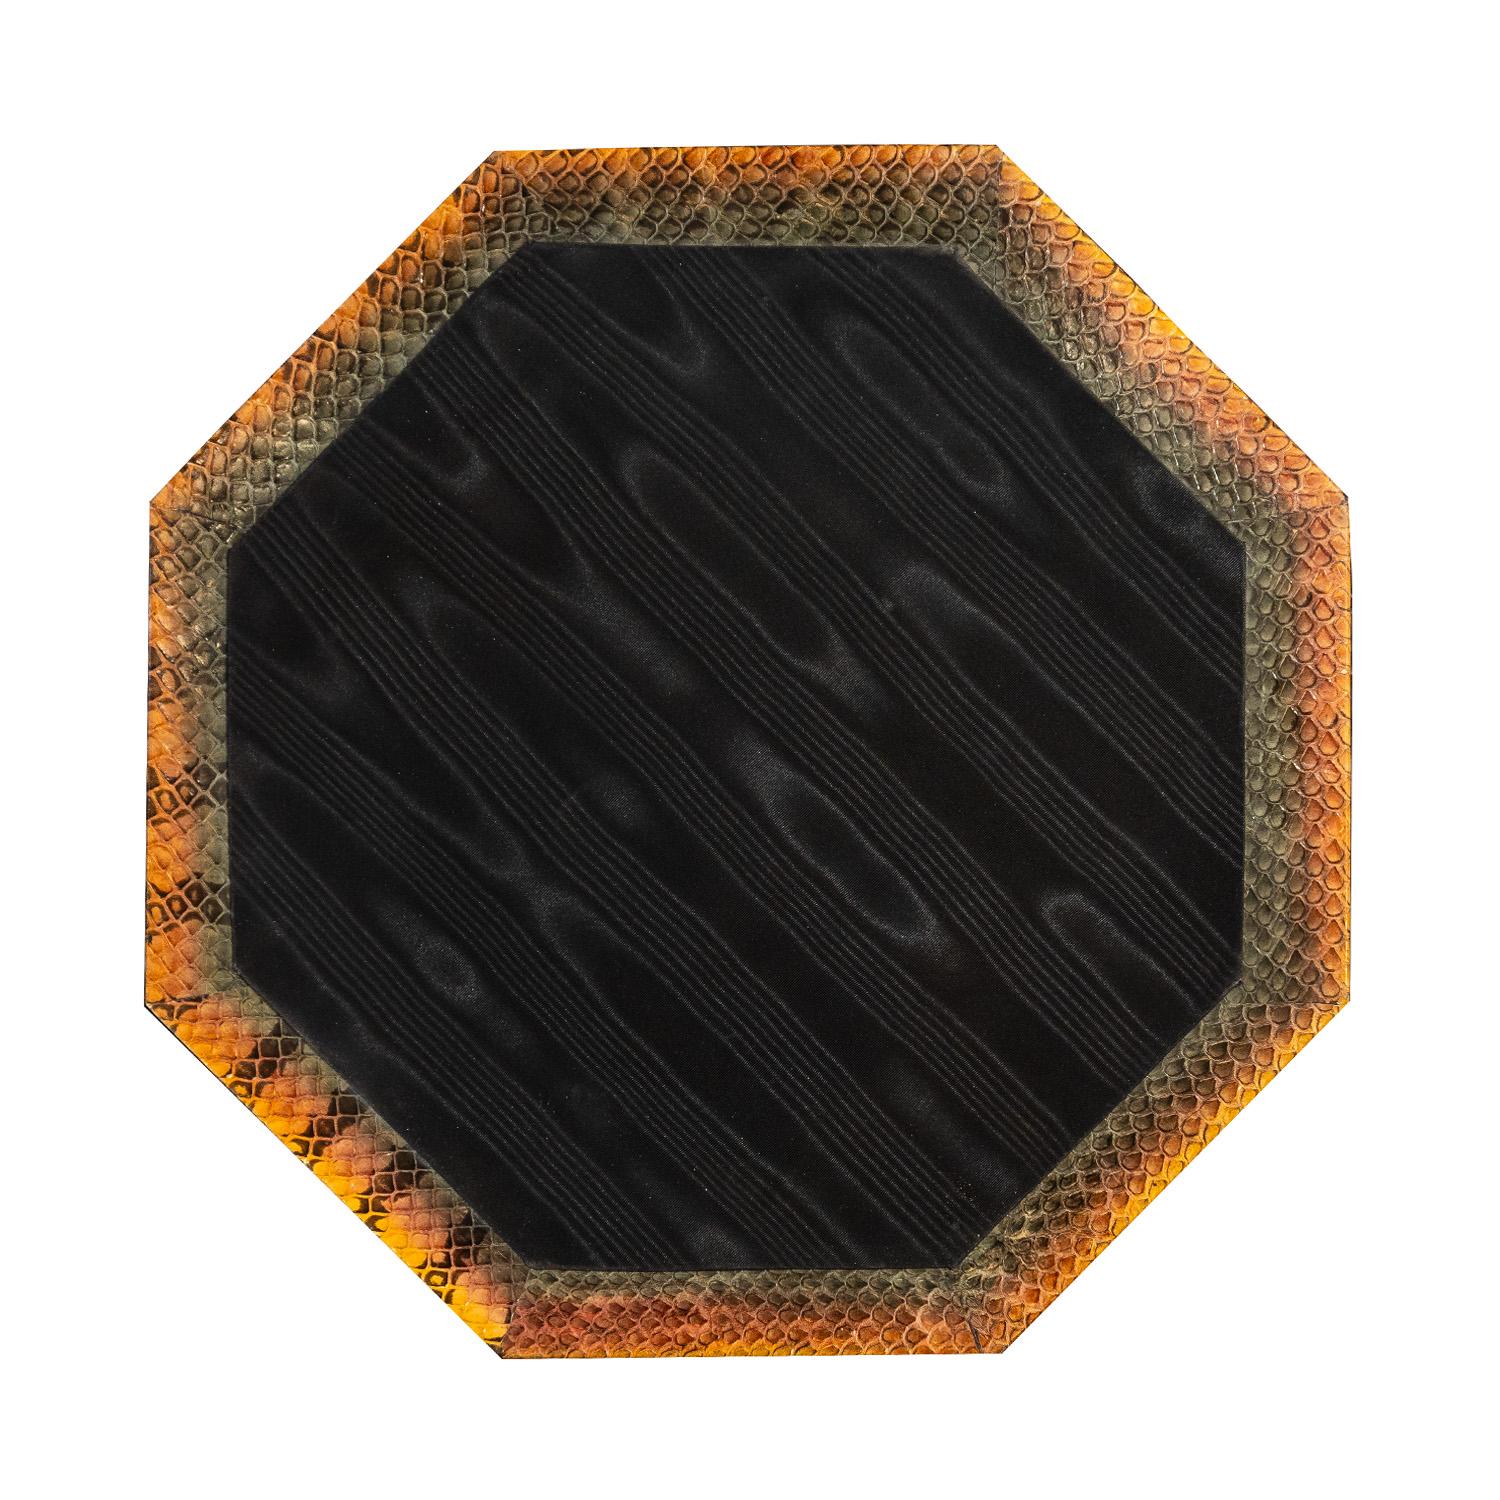 Hand-Crafted Lobel Originals Octagonal Tray in Multicolor Python with Malachite Accents - New For Sale